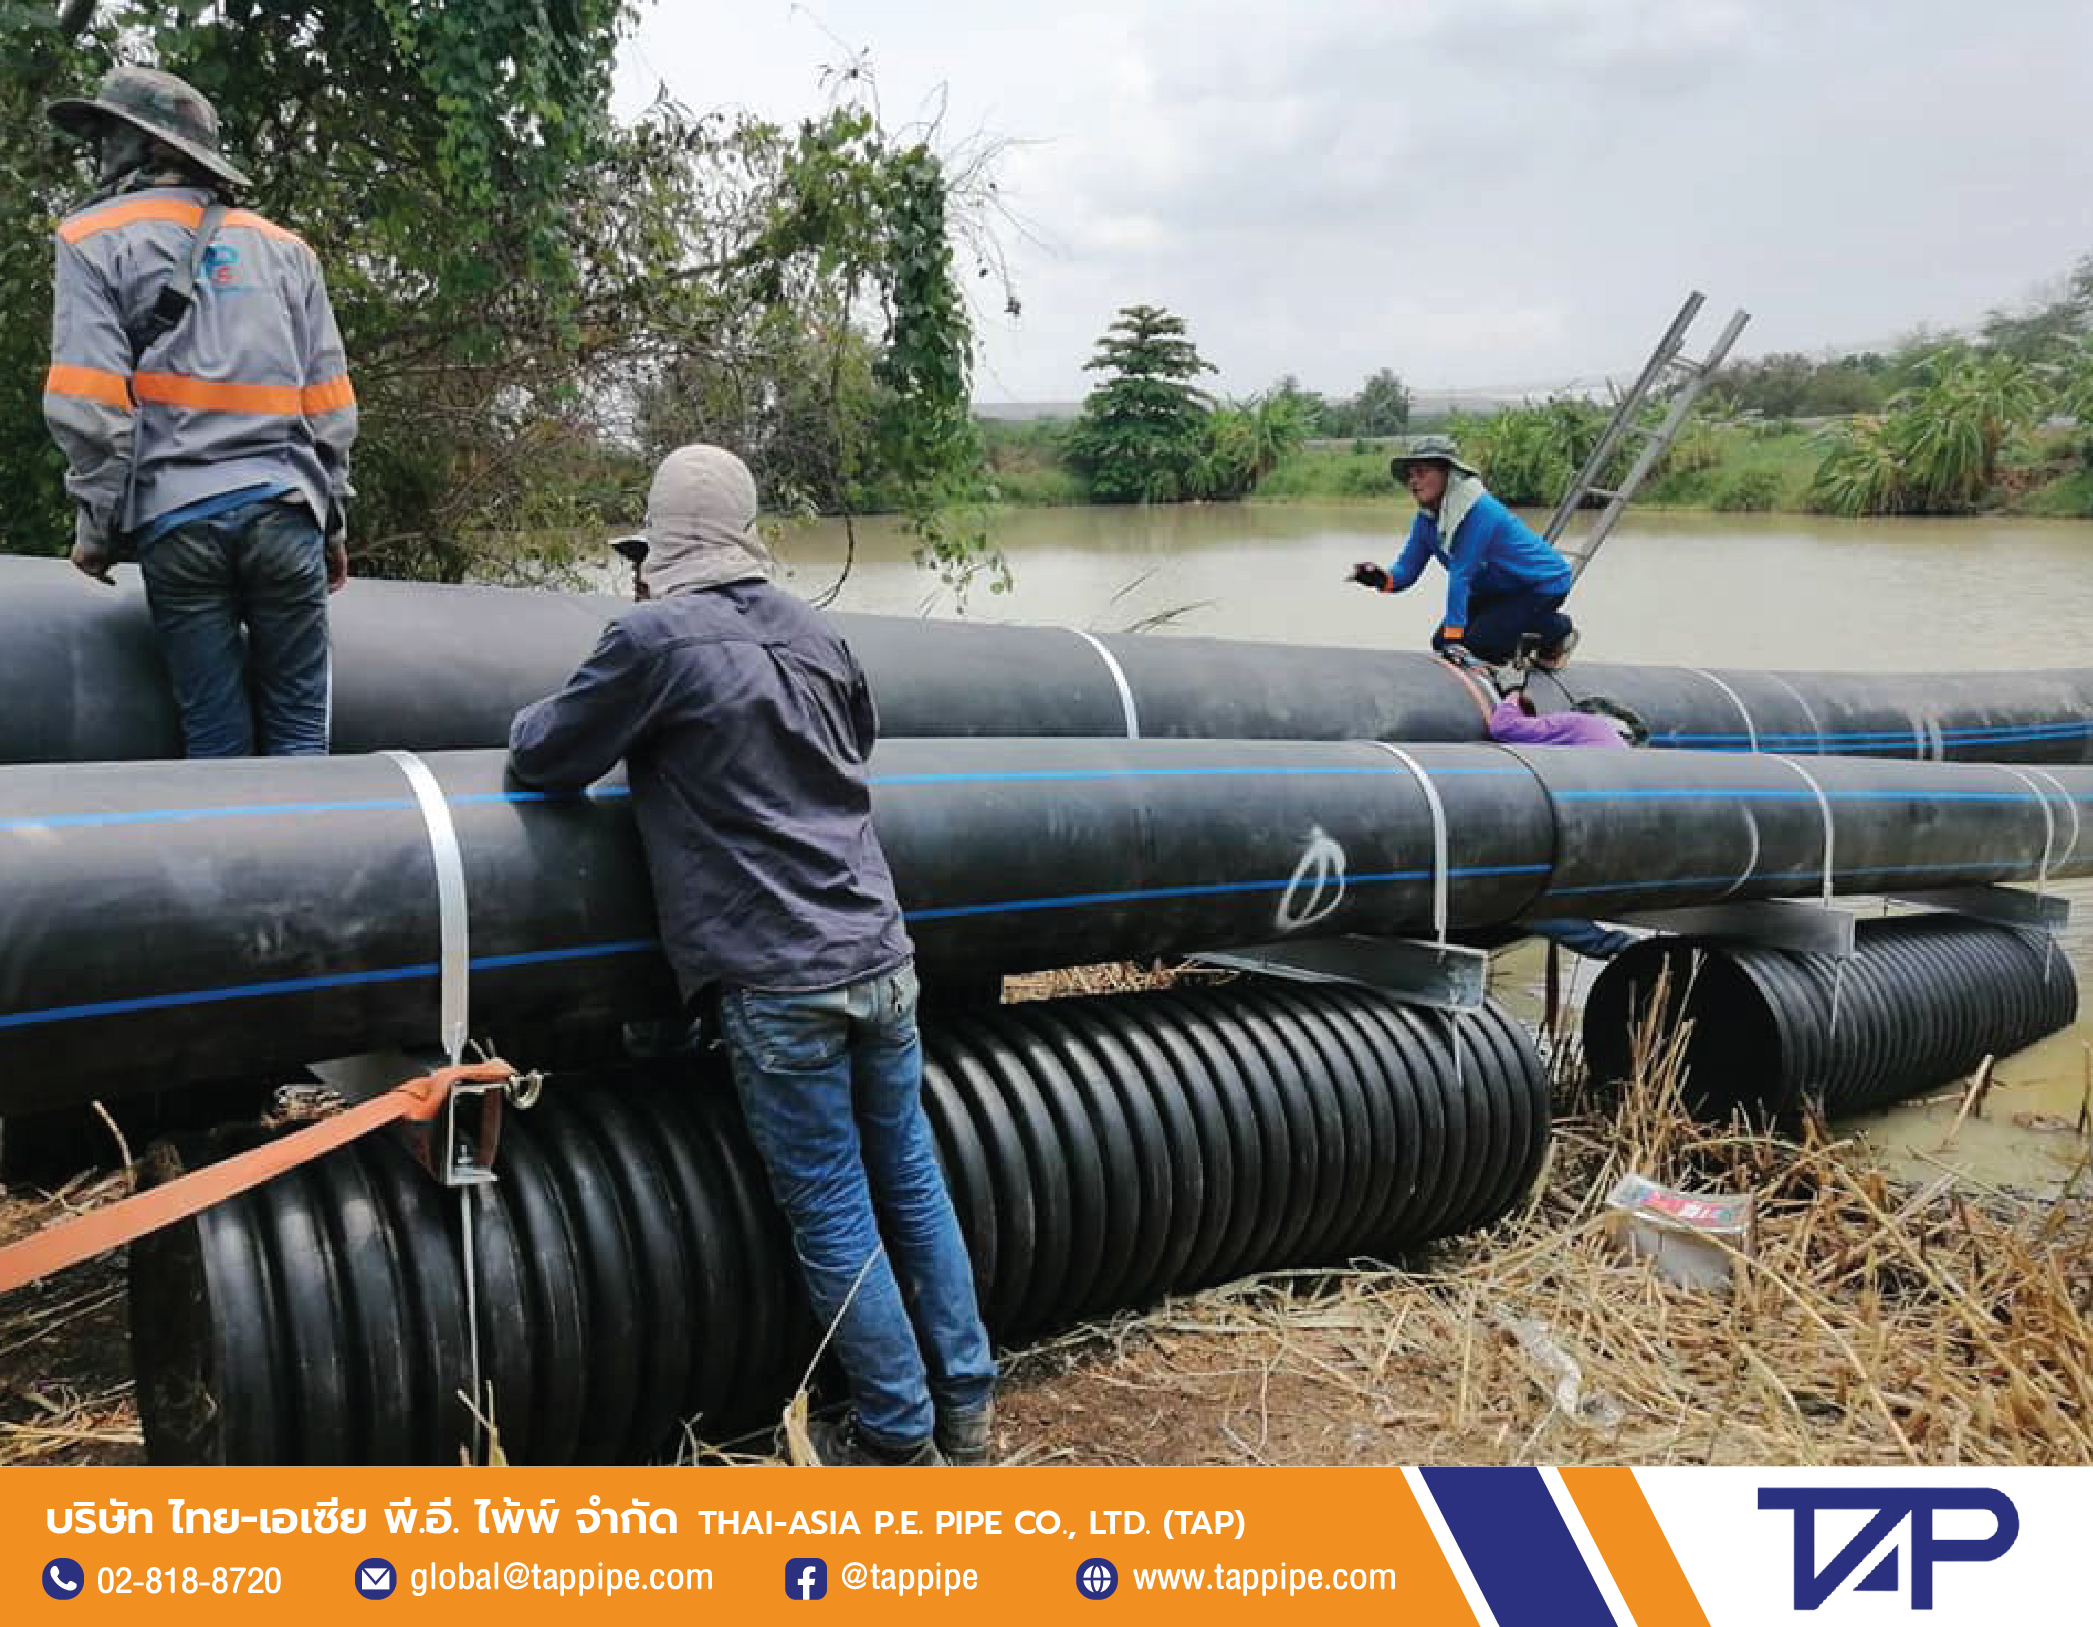 Engineers are preparing to install HDPE pipe with a floating capital made of Corrugated Pipe ( TAPKORR ) into the river